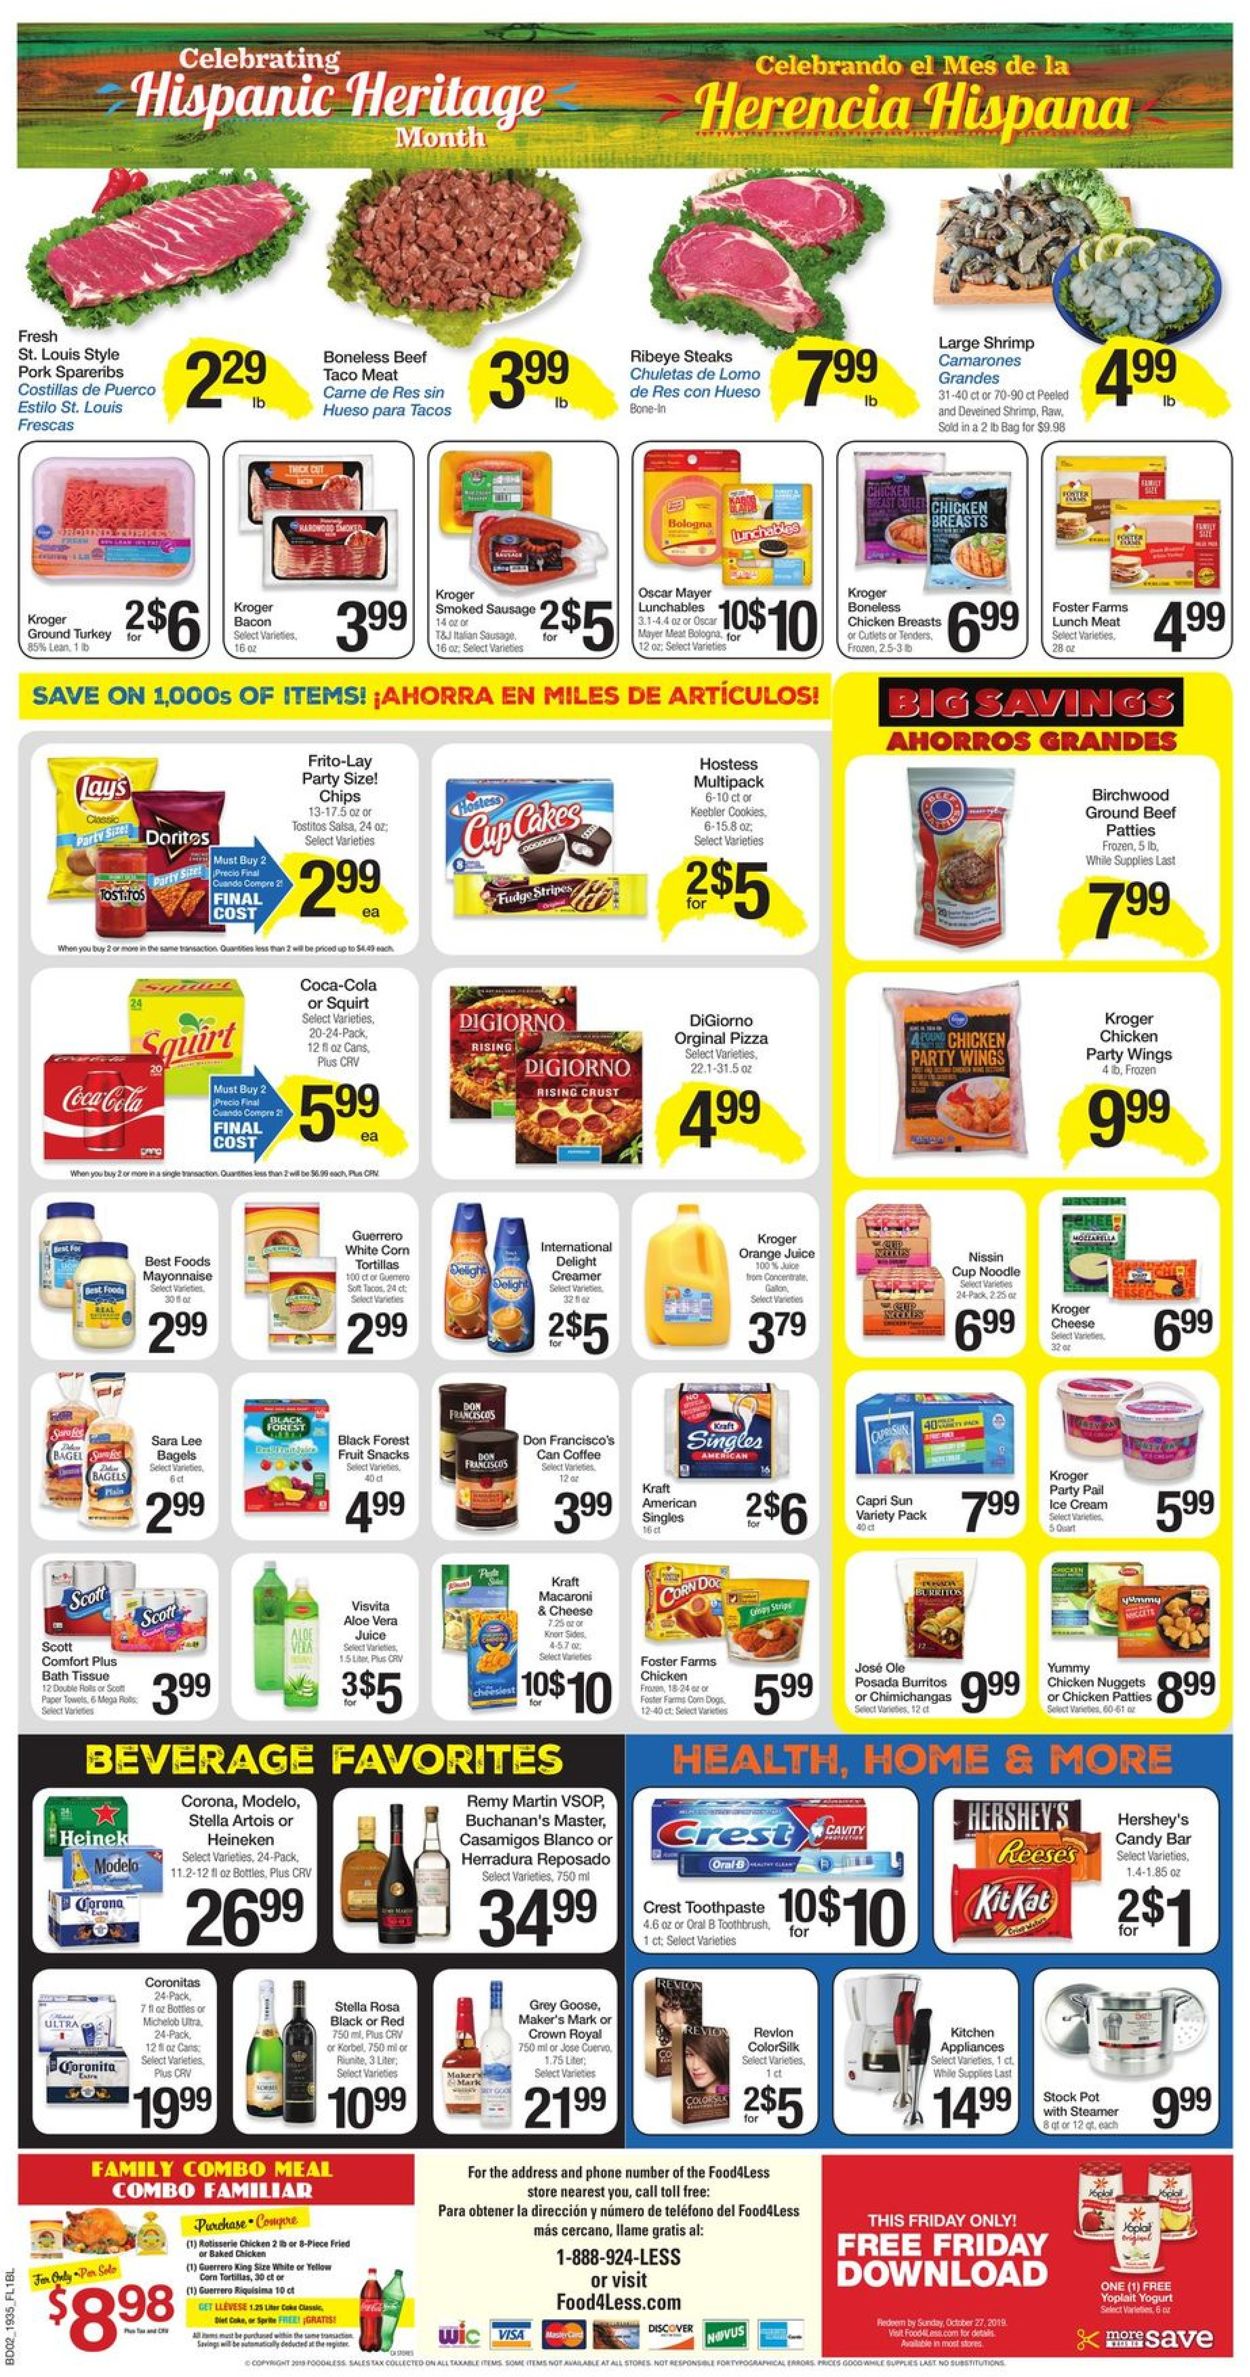 Food 4 Less Current weekly ad 10/02 - 10/08/2019 [2 ...